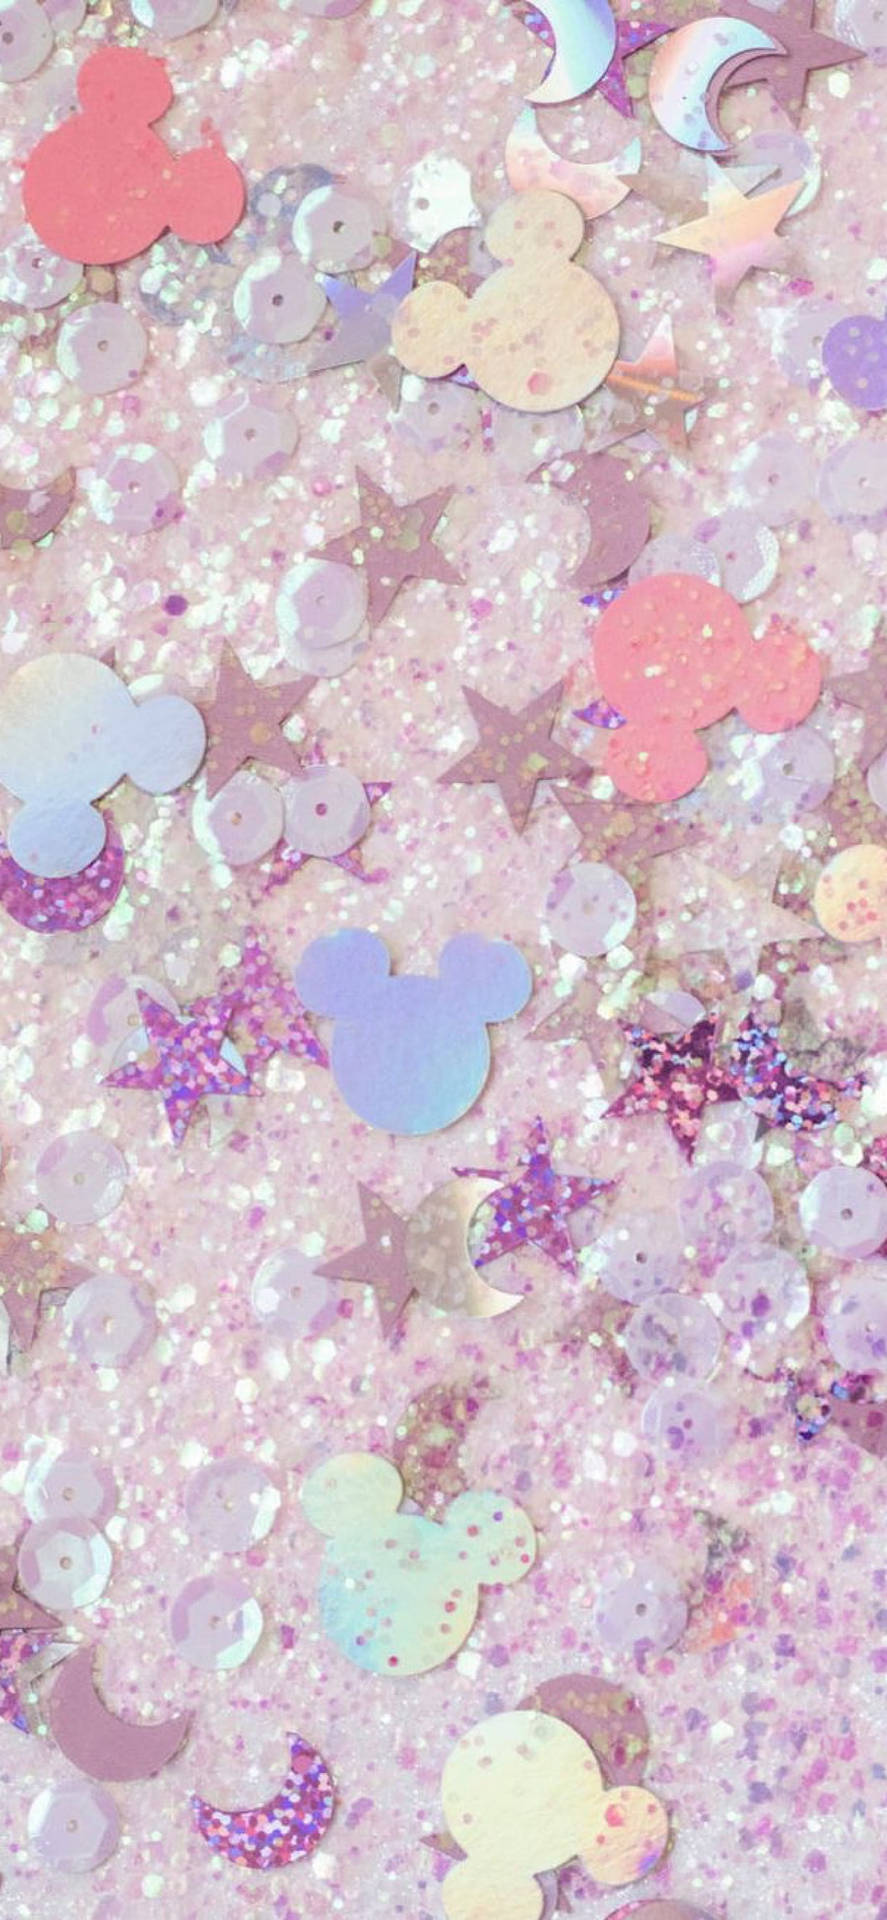 Sparkly And Glittery Disney Phone Wallpaper